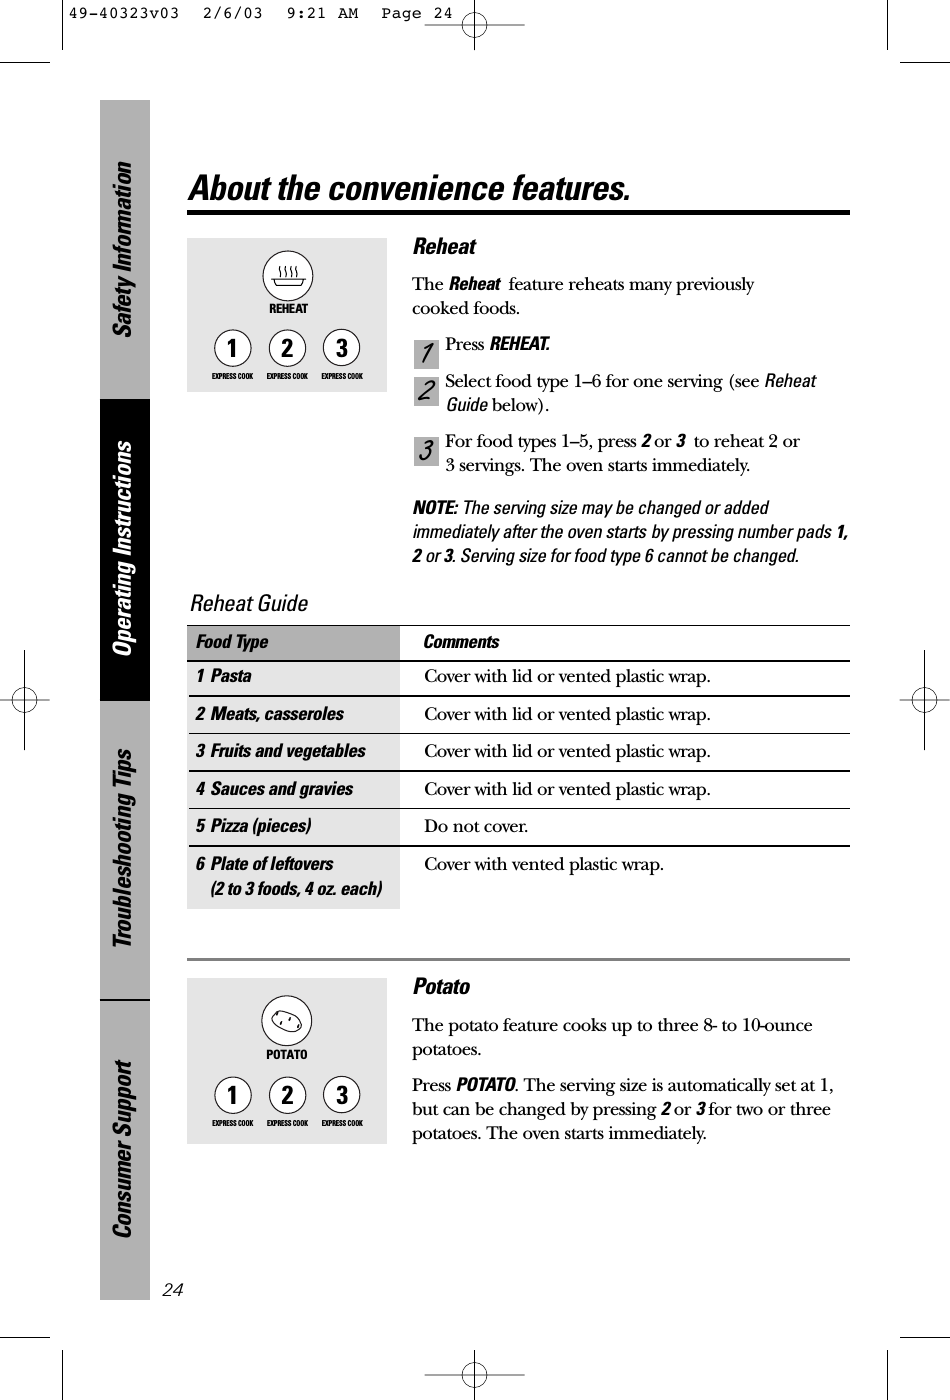 Safety InformationOperating InstructionsTroubleshooting TipsConsumer Support24About the convenience features.ReheatThe Reheat feature reheats many previously cooked foods.Press REHEAT.Select food type 1–6 for one serving (see ReheatGuide below).For food types 1–5, press 2or 3to reheat 2 or 3 servings. The oven starts immediately.NOTE: The serving size may be changed or addedimmediately after the oven starts by pressing number pads 1,2or 3. Serving size for food type 6 cannot be changed.3211EXPRESS COOK3EXPRESS COOK2EXPRESS COOKREHEAT1 Pasta Cover with lid or vented plastic wrap.2 Meats, casseroles Cover with lid or vented plastic wrap.3 Fruits and vegetables Cover with lid or vented plastic wrap.4 Sauces and gravies Cover with lid or vented plastic wrap.5 Pizza (pieces) Do not cover.6 Plate of leftovers Cover with vented plastic wrap.(2 to 3 foods, 4 oz. each)Food Type CommentsReheat Guide PotatoThe potato feature cooks up to three 8- to 10-ouncepotatoes.Press POTATO. The serving size is automatically set at 1,but can be changed by pressing 2or 3for two or threepotatoes. The oven starts immediately.POTATO1EXPRESS COOK3EXPRESS COOK2EXPRESS COOK49-40323v03  2/6/03  9:21 AM  Page 24